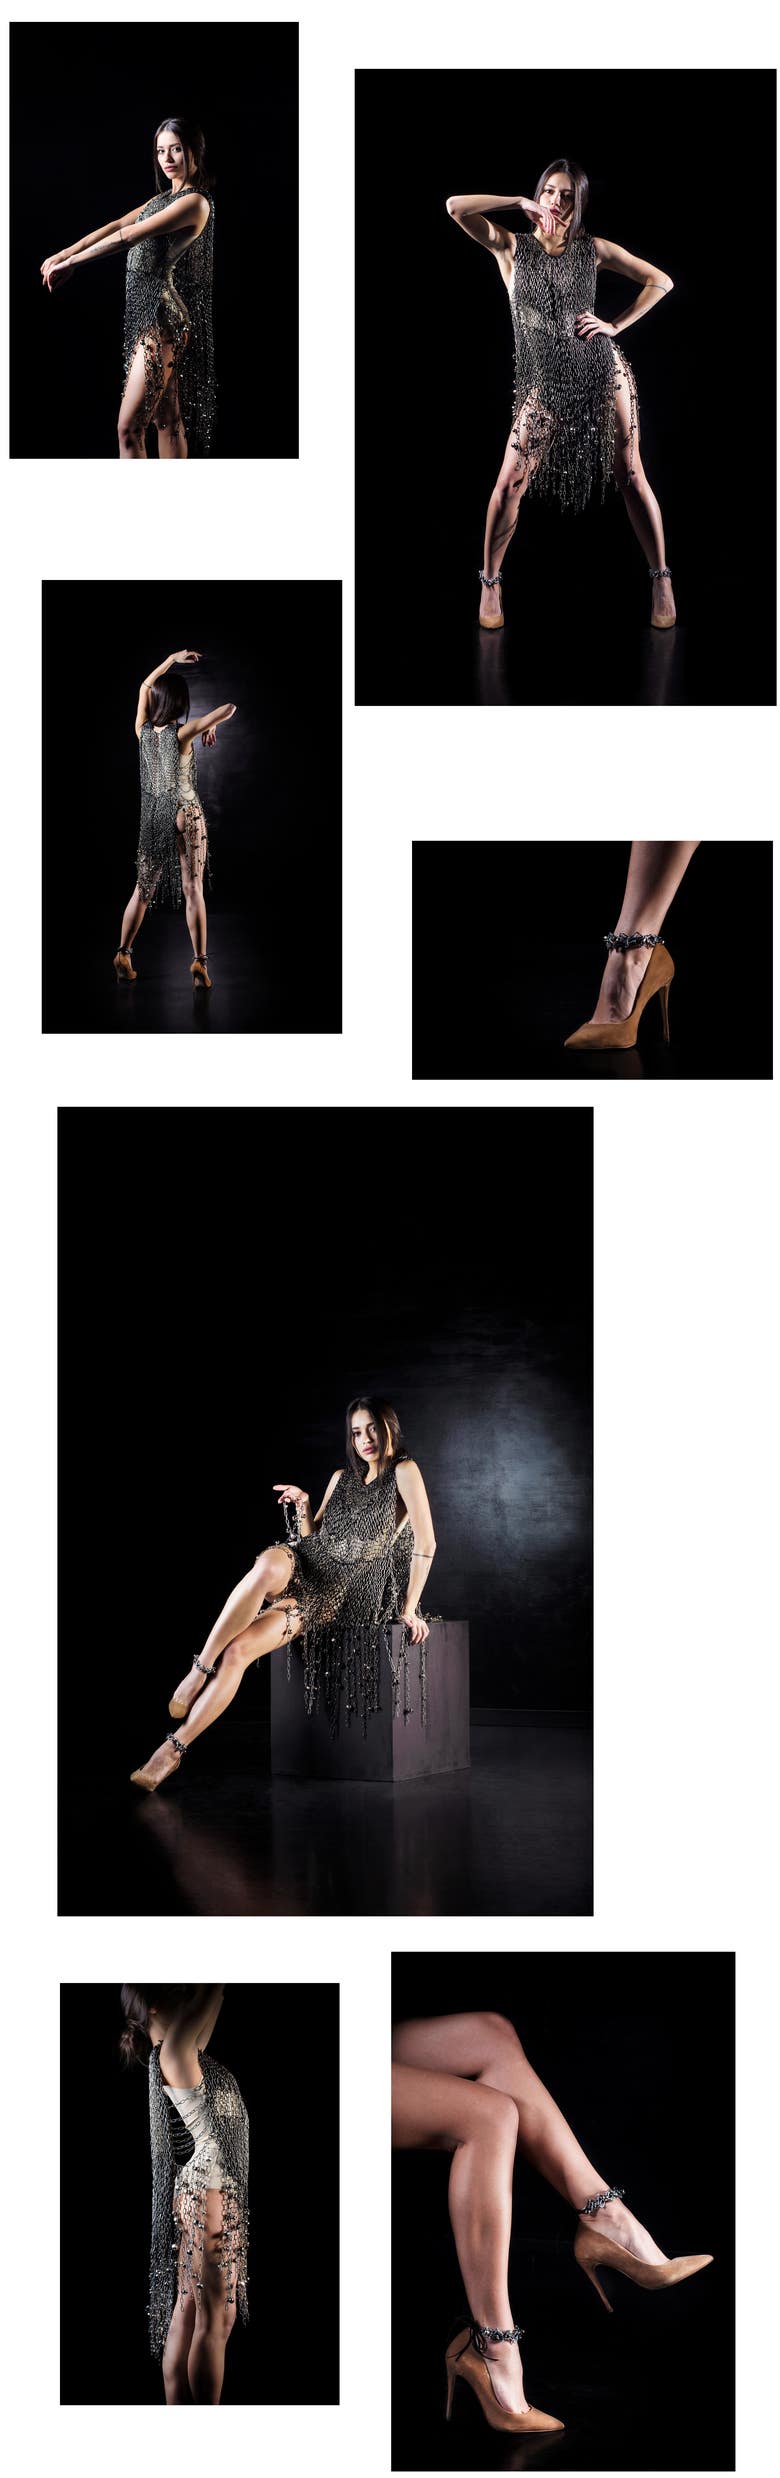 Professional shooting - Fashion project